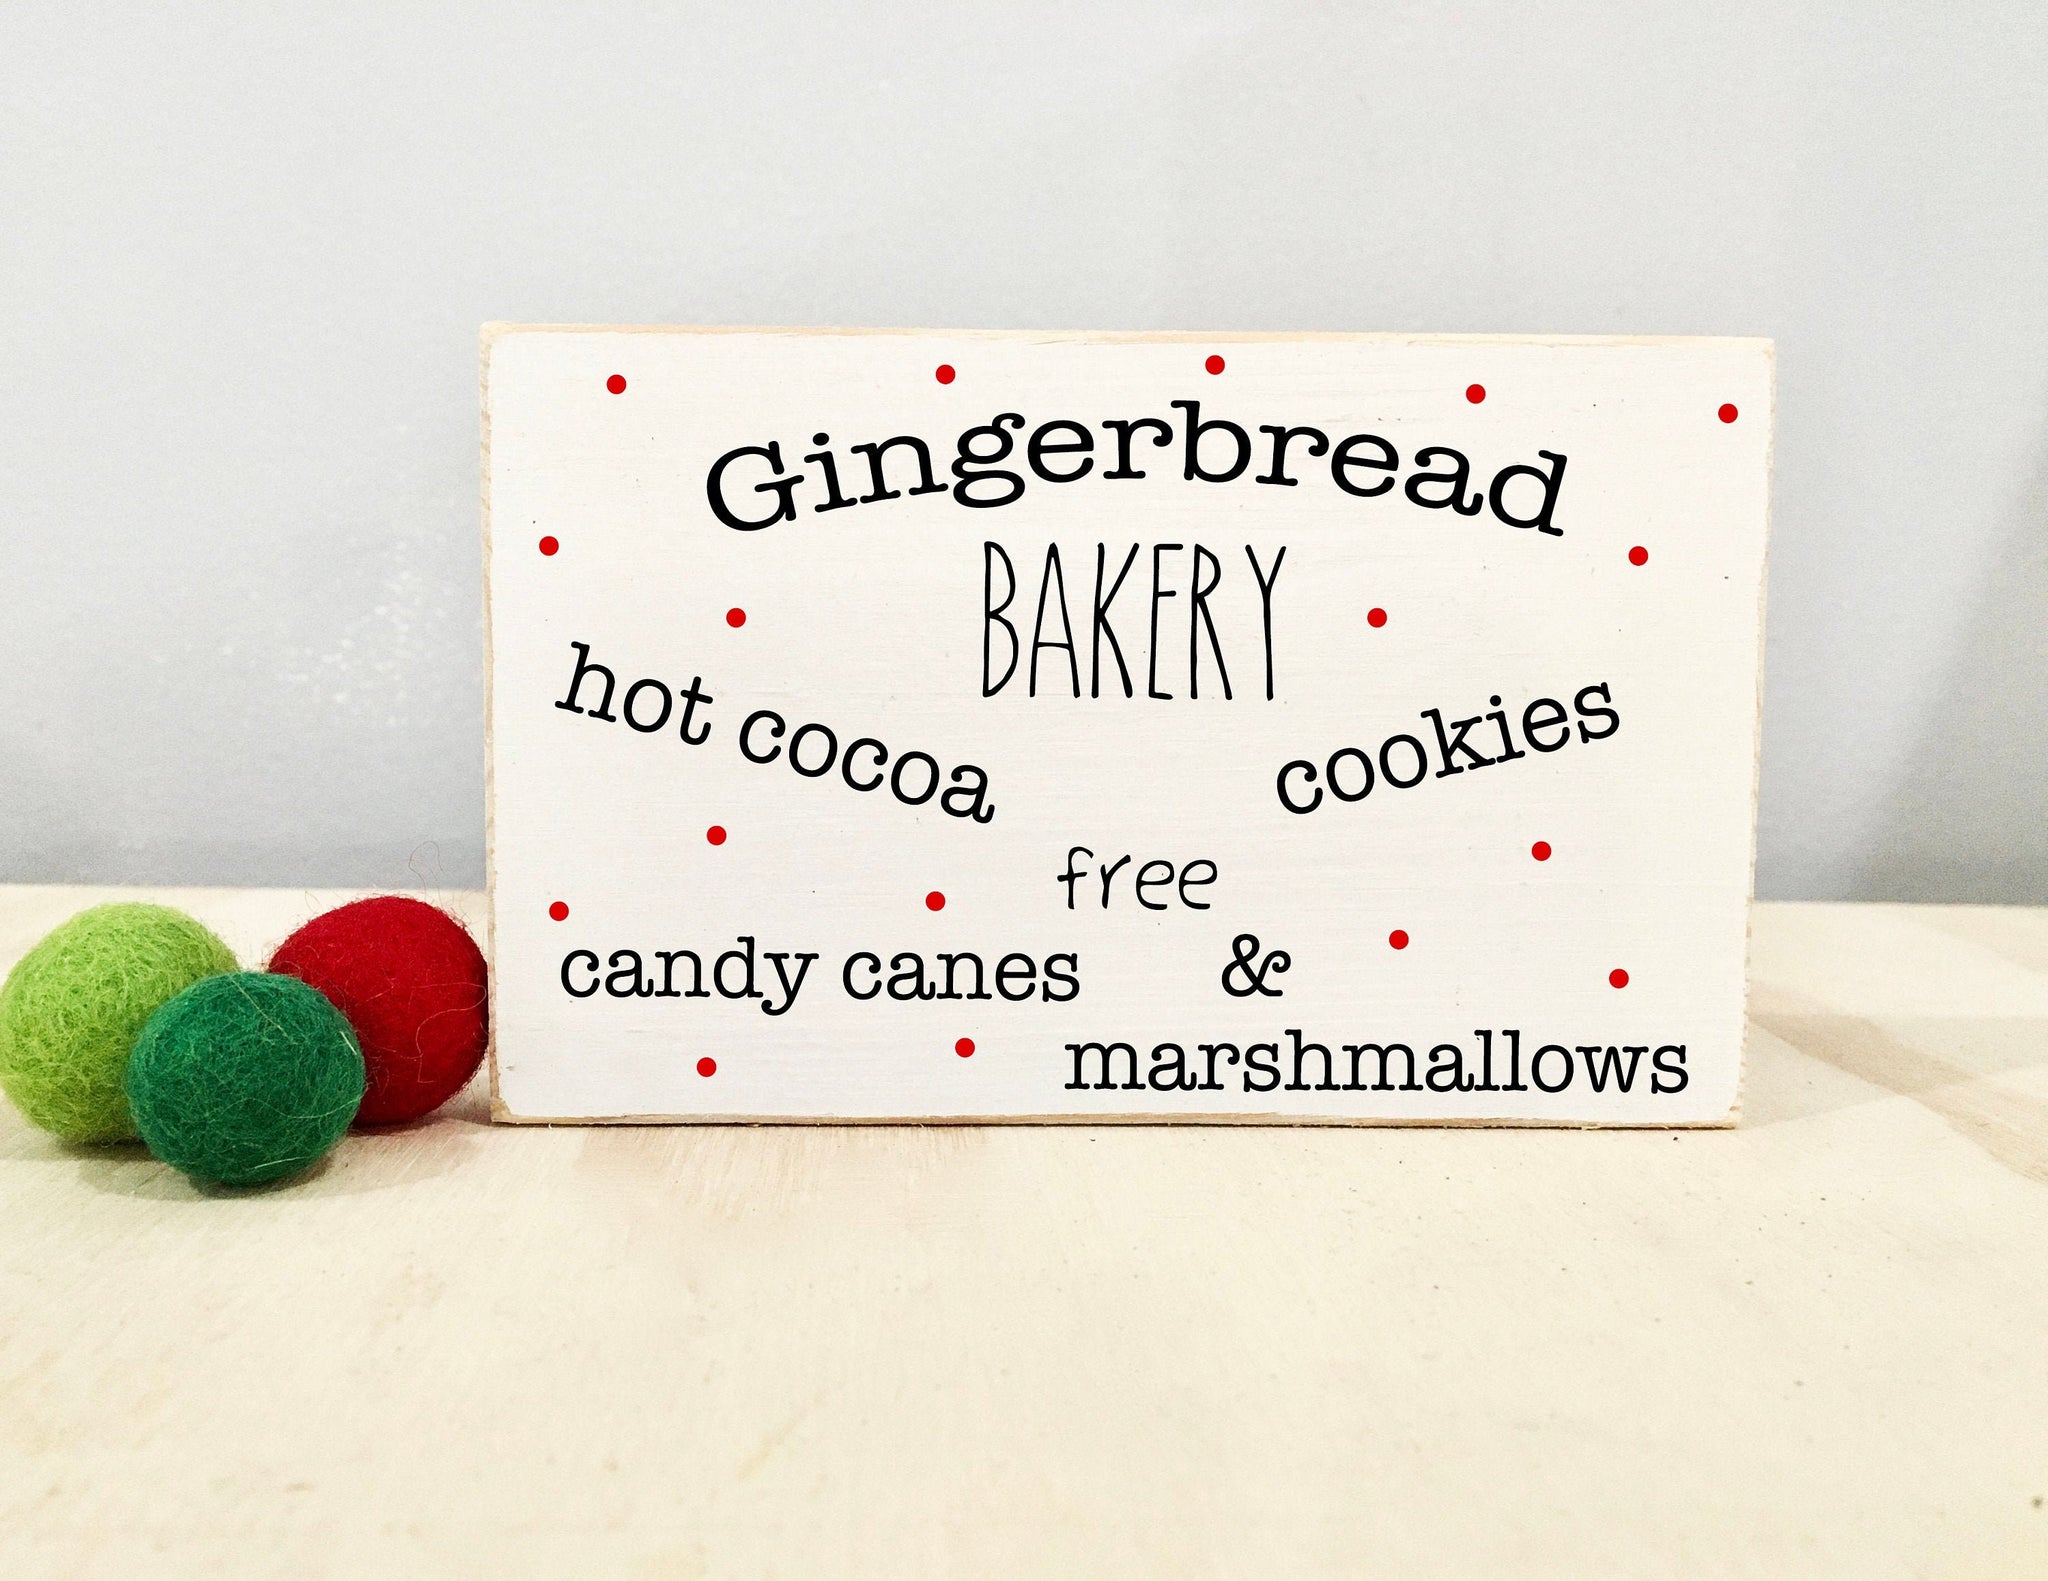 Gingerbread bakery sign, Christmas decor, Tiered tray,  Hot cocoa, Candy canes, Cookies, Marshmallows, Farmhouse, Secret Santa gift